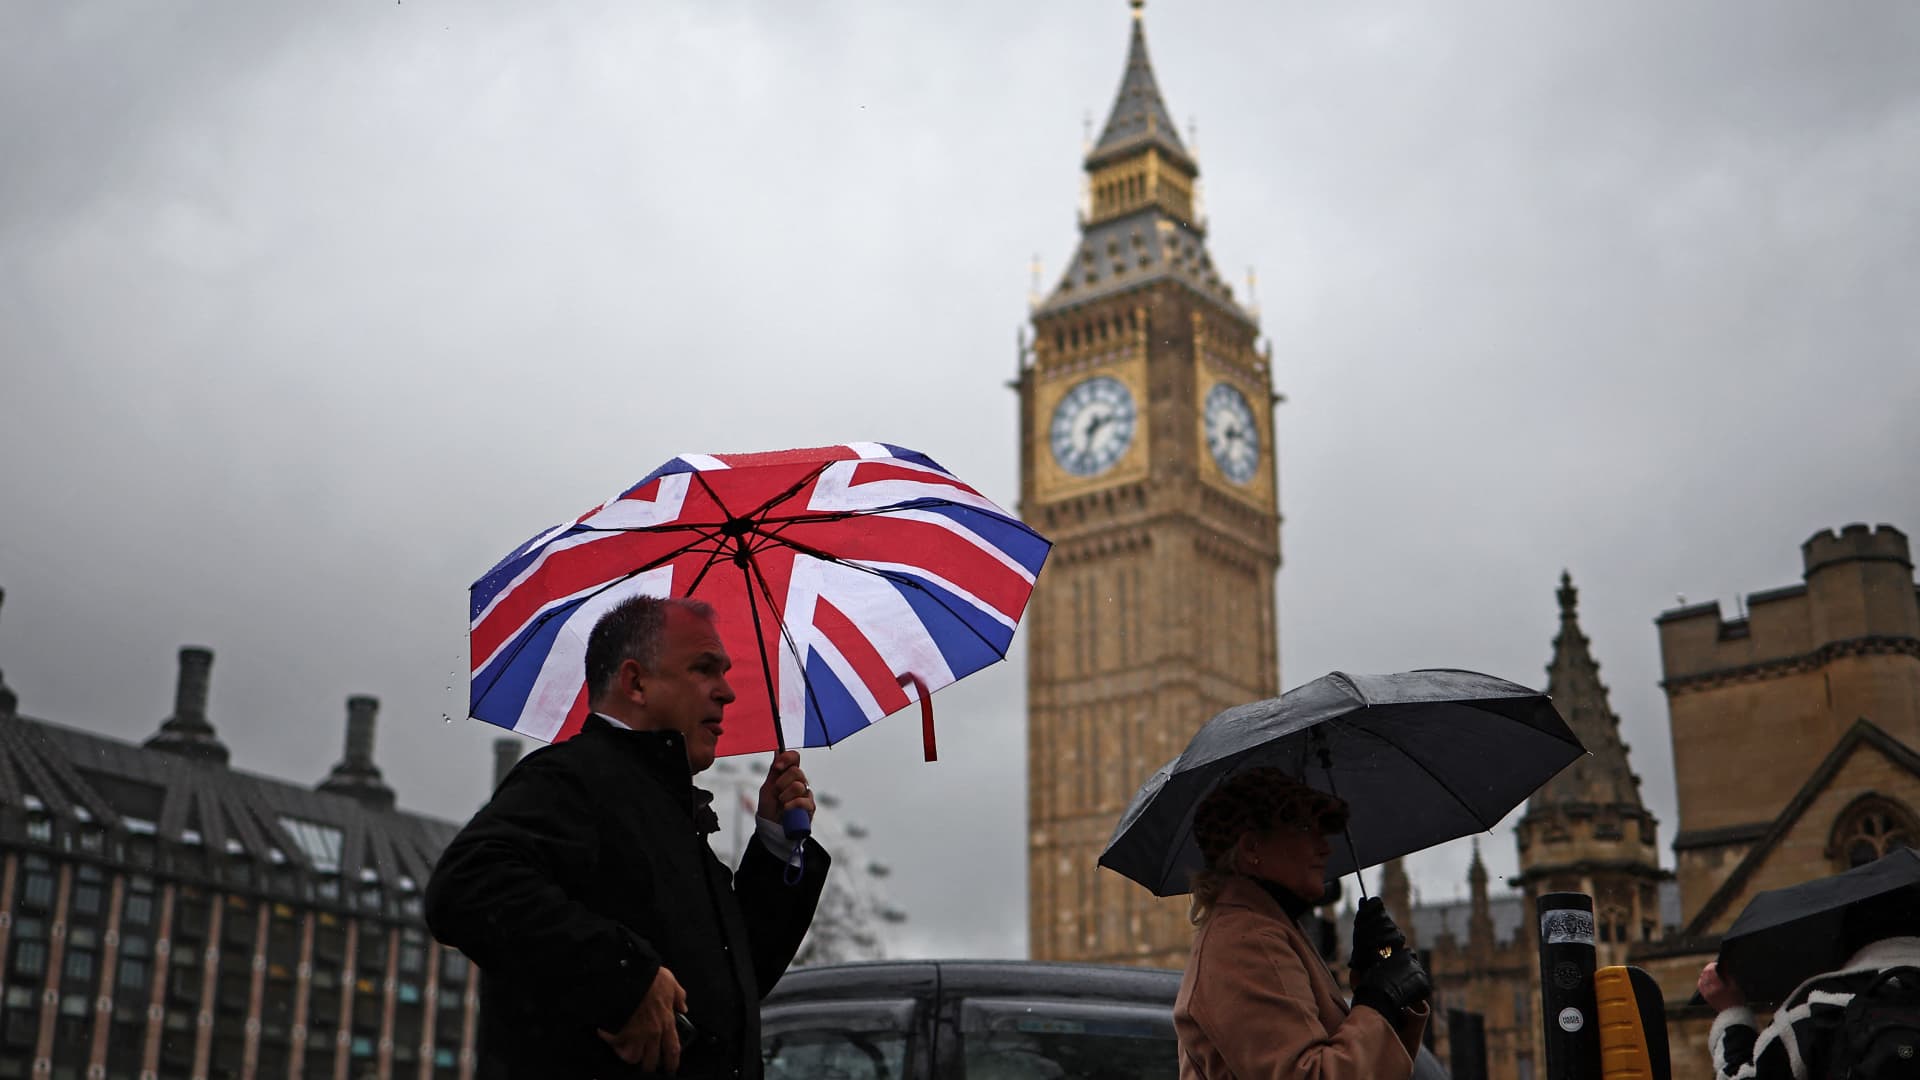 Pedestrians shelter from the rain under umbrellas as they pass the Elizabeth Tower, commonly known by the name of the clock's bell, Big Ben, at the Palace of Westminster, home to the Houses of Parliament, in London on Feb. 22, 2024.